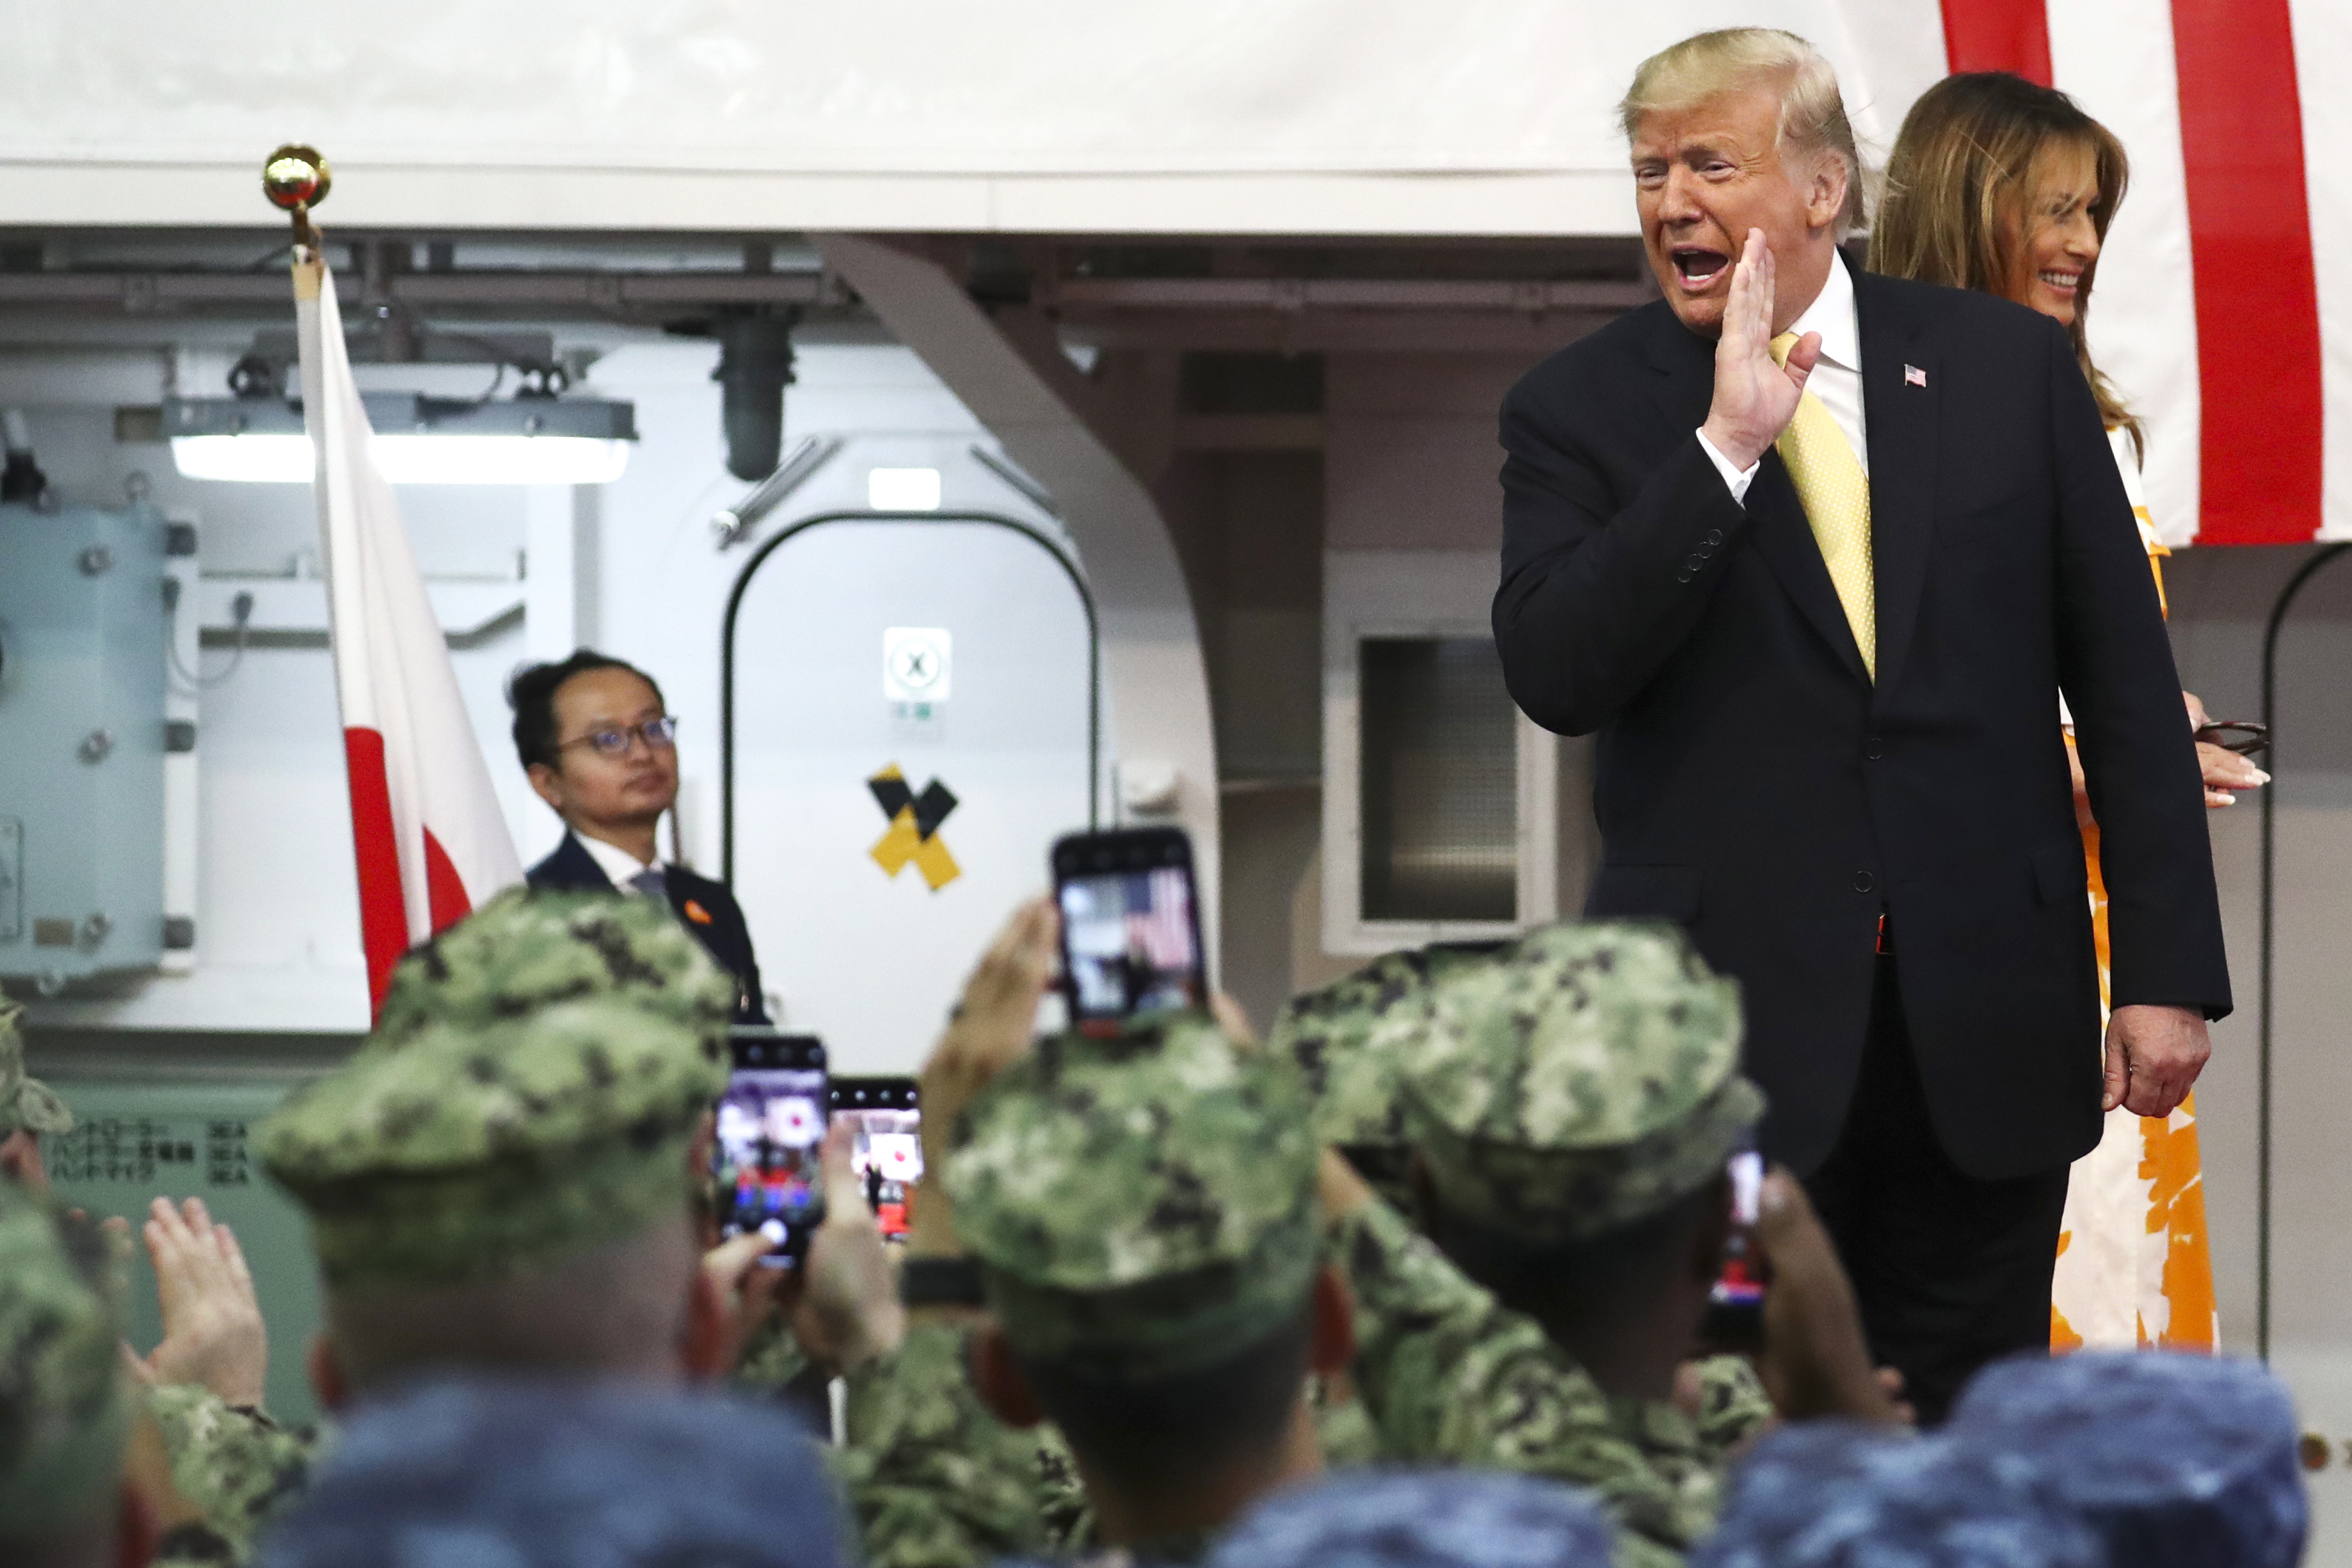 U.S. President Donald Trump and first lady Melania Trump react during delivering a speech to Japanese and U.S. troops as they aboard Japan Maritime Self-Defense Force's (JMSDF) helicopter carrier DDH-184 Kaga at JMSDF Yokosuka base in Yokosuka, south of Tokyo Tuesday, May 28, 2019. (Athit Perawongmetha/Pool Photo vi AP)